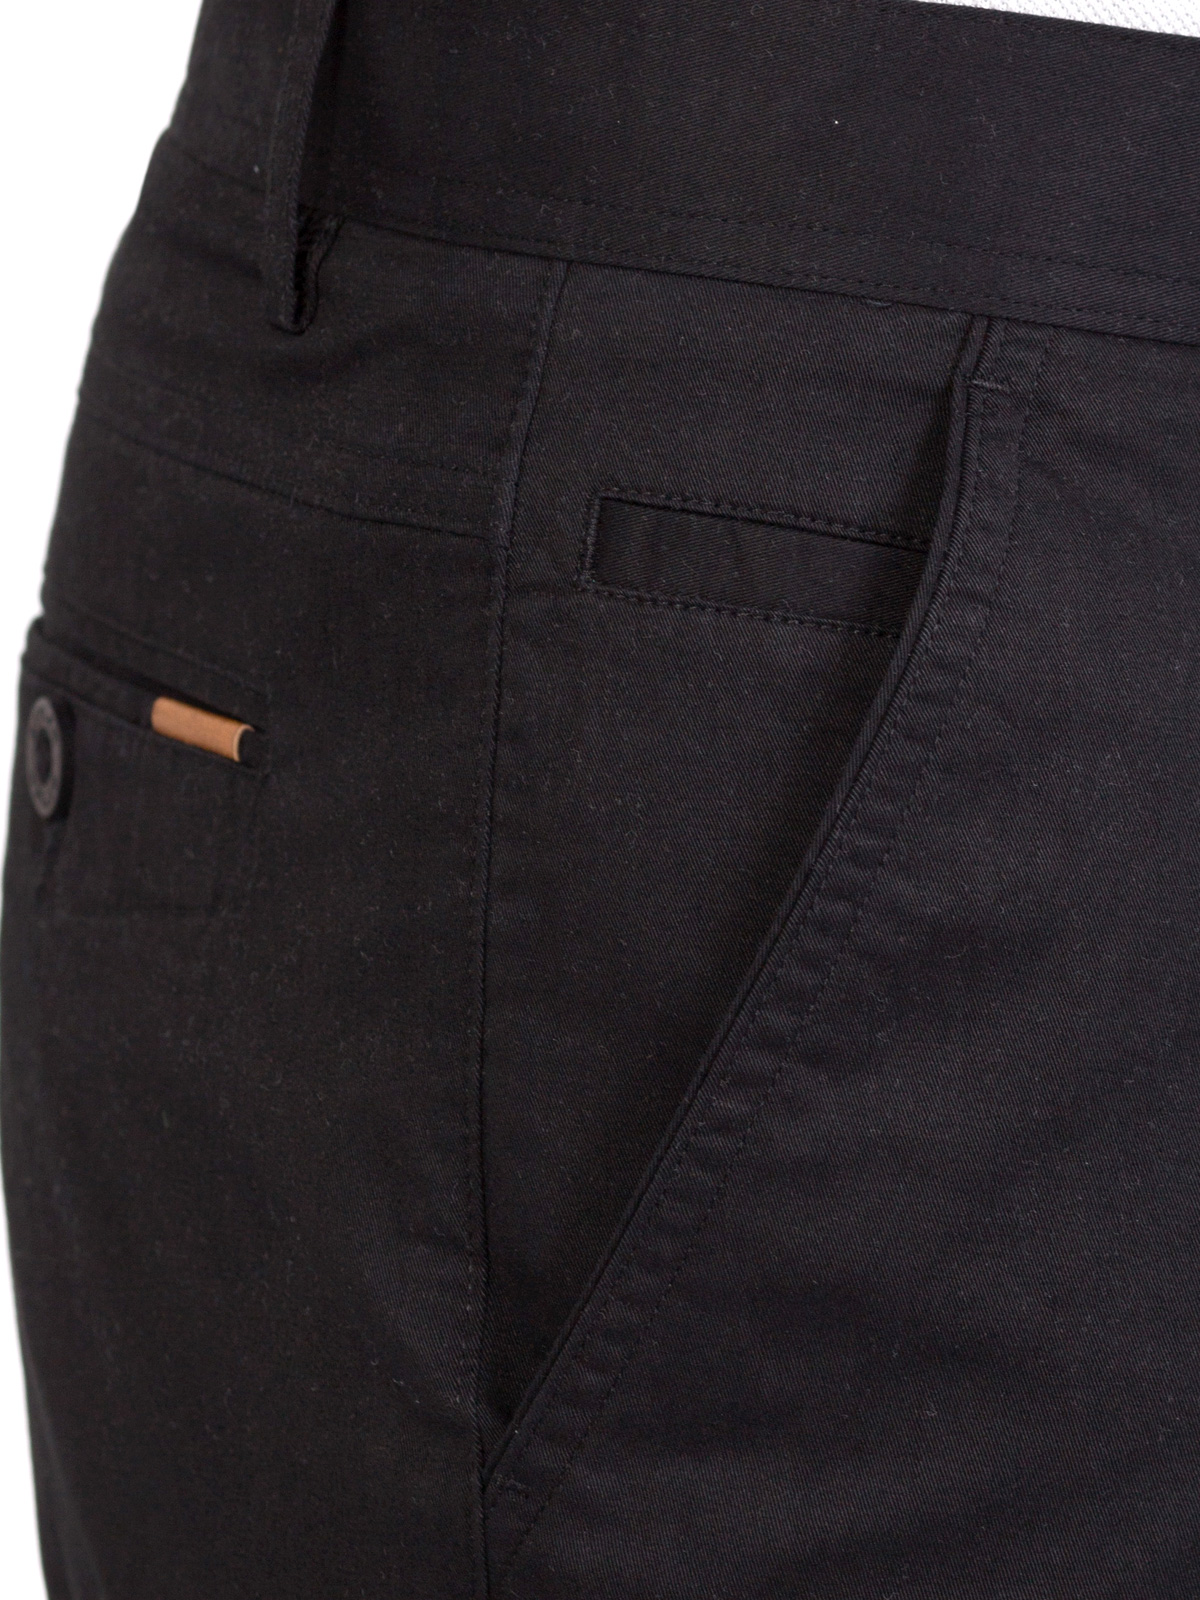  pants in black cotton with elastane  - 63229 € 11.25 img2